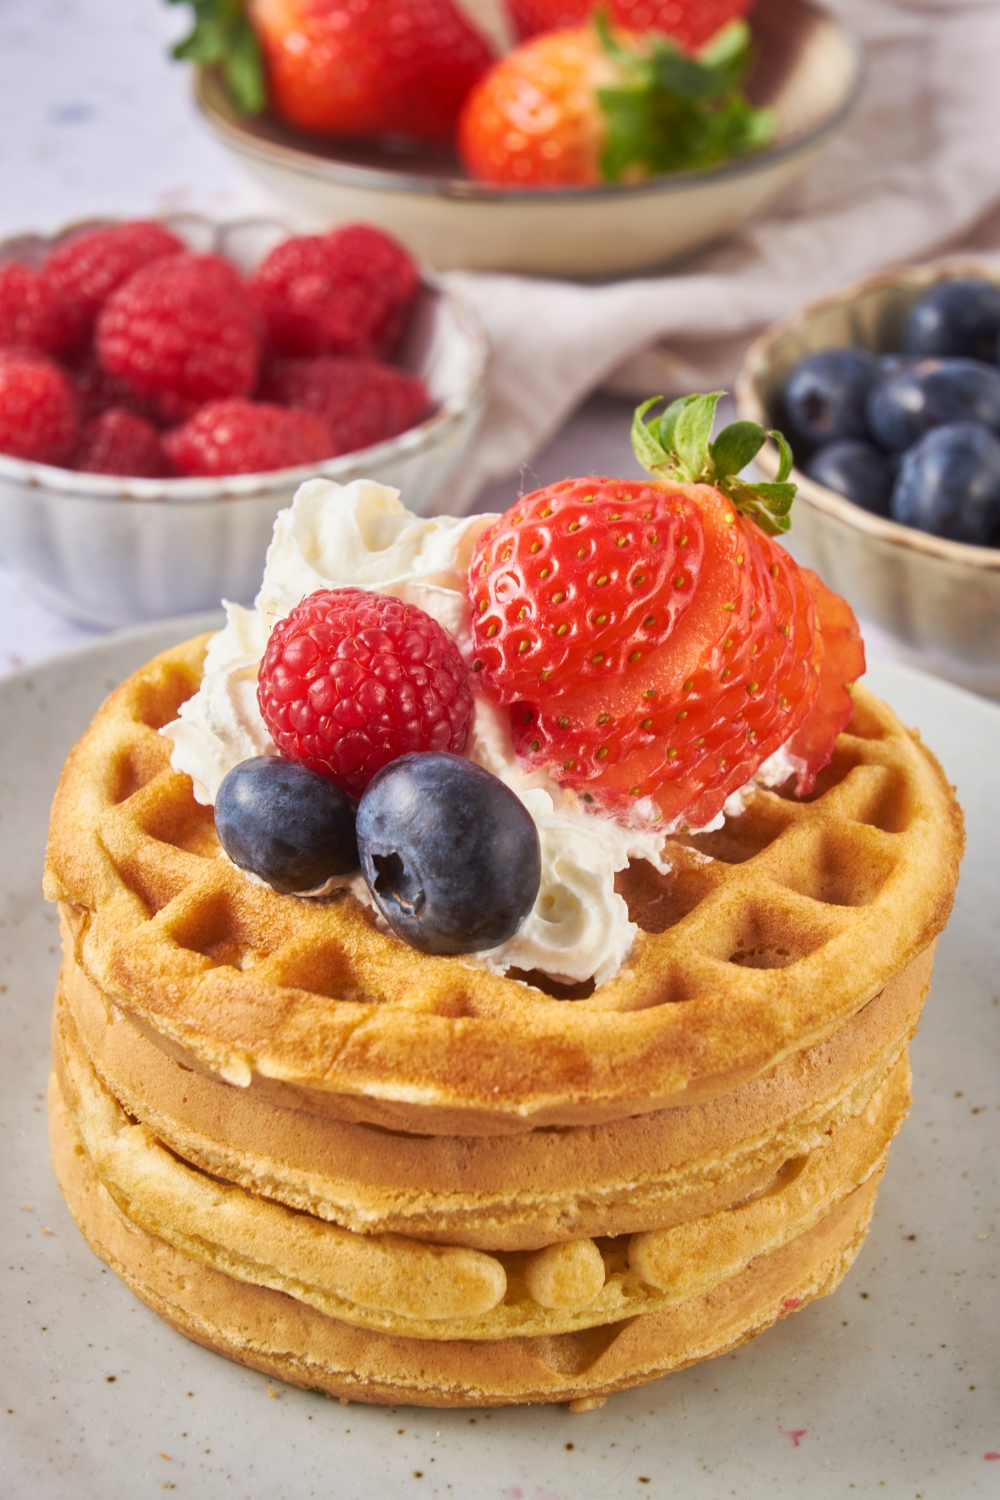 A stack of waffles topped with whipped cream and fresh berries. In the background are bowls of berries.